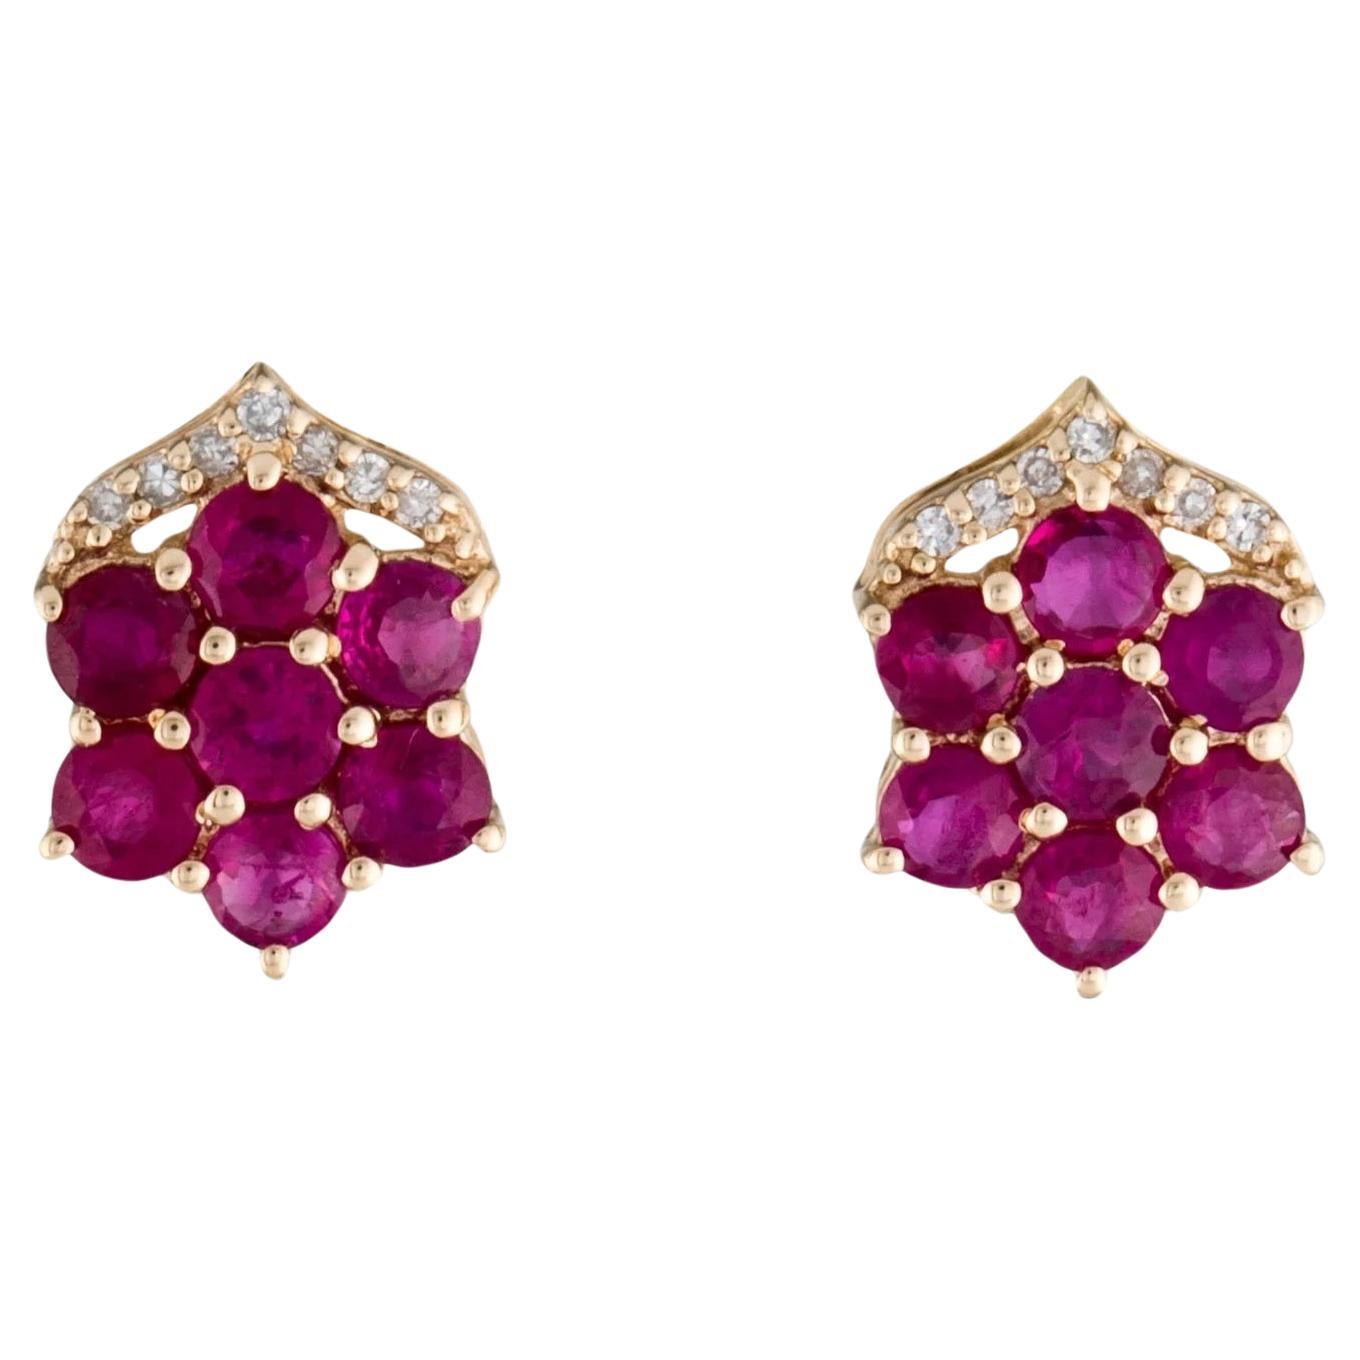  Well-Executed 14K Yellow Gold Ruby and Diamond Earrings For Sale